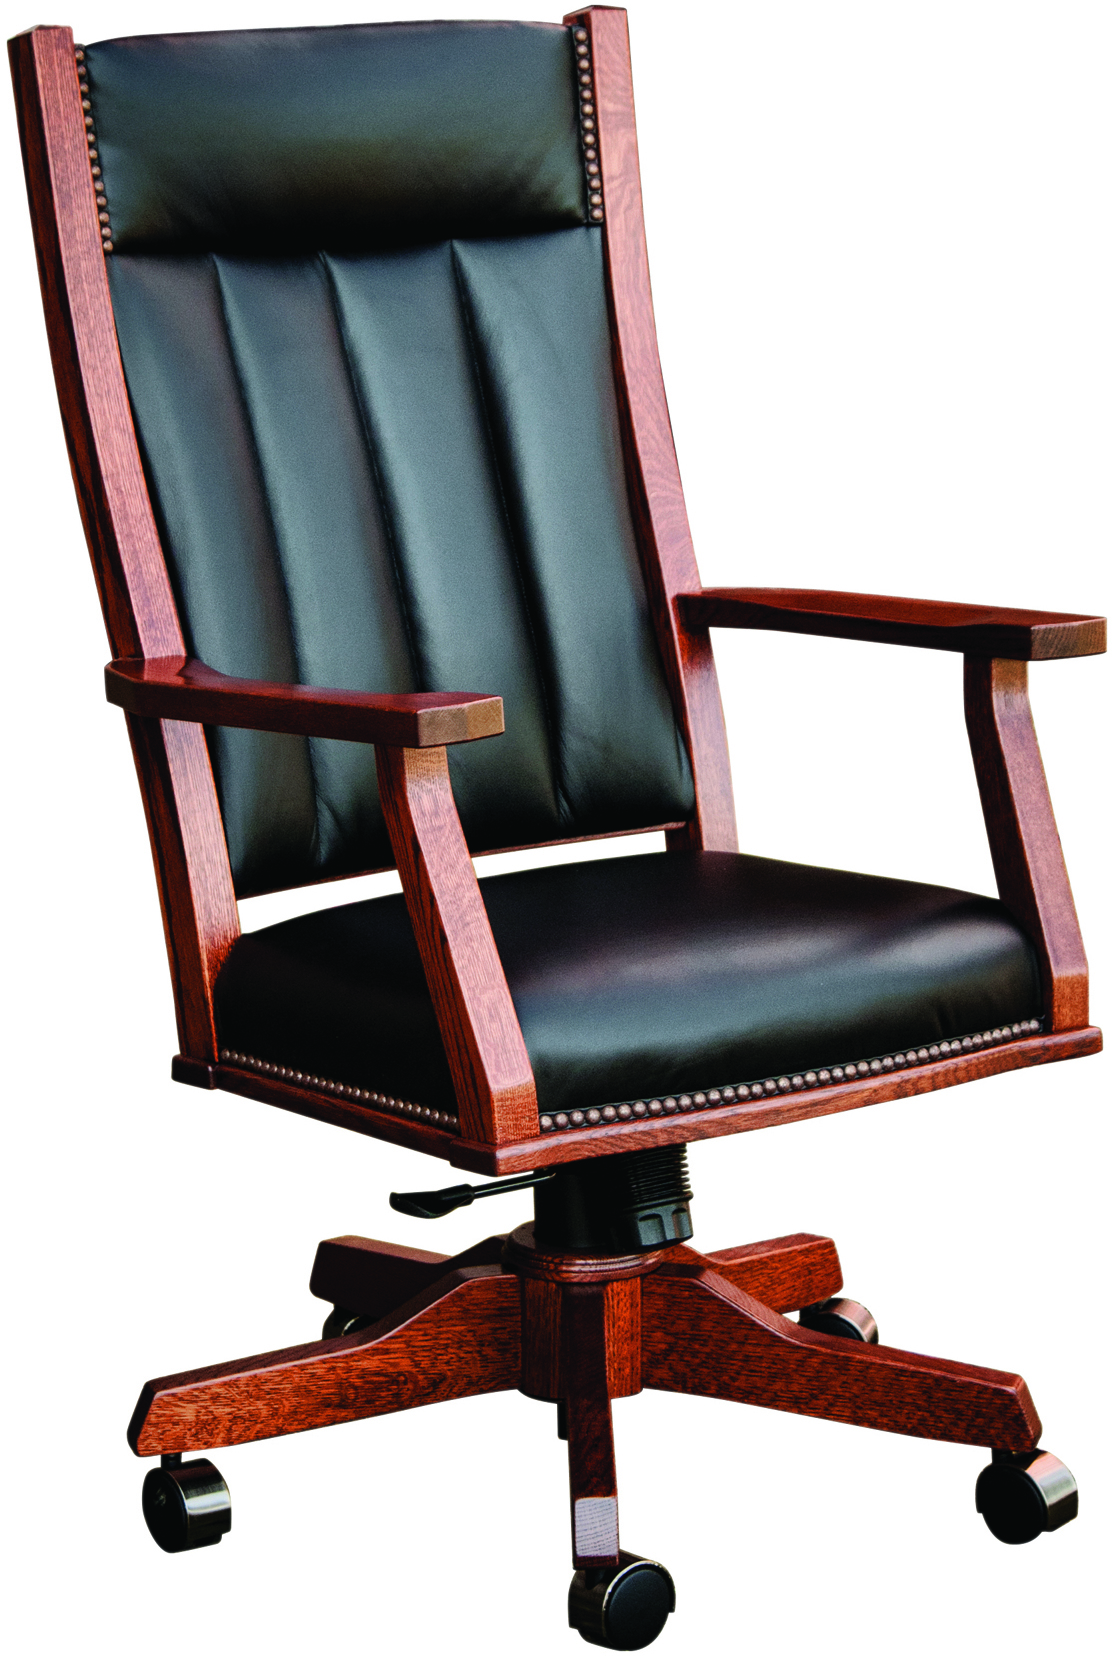 Mission Office Chair Mission Solid Wood Executive Desk Chair